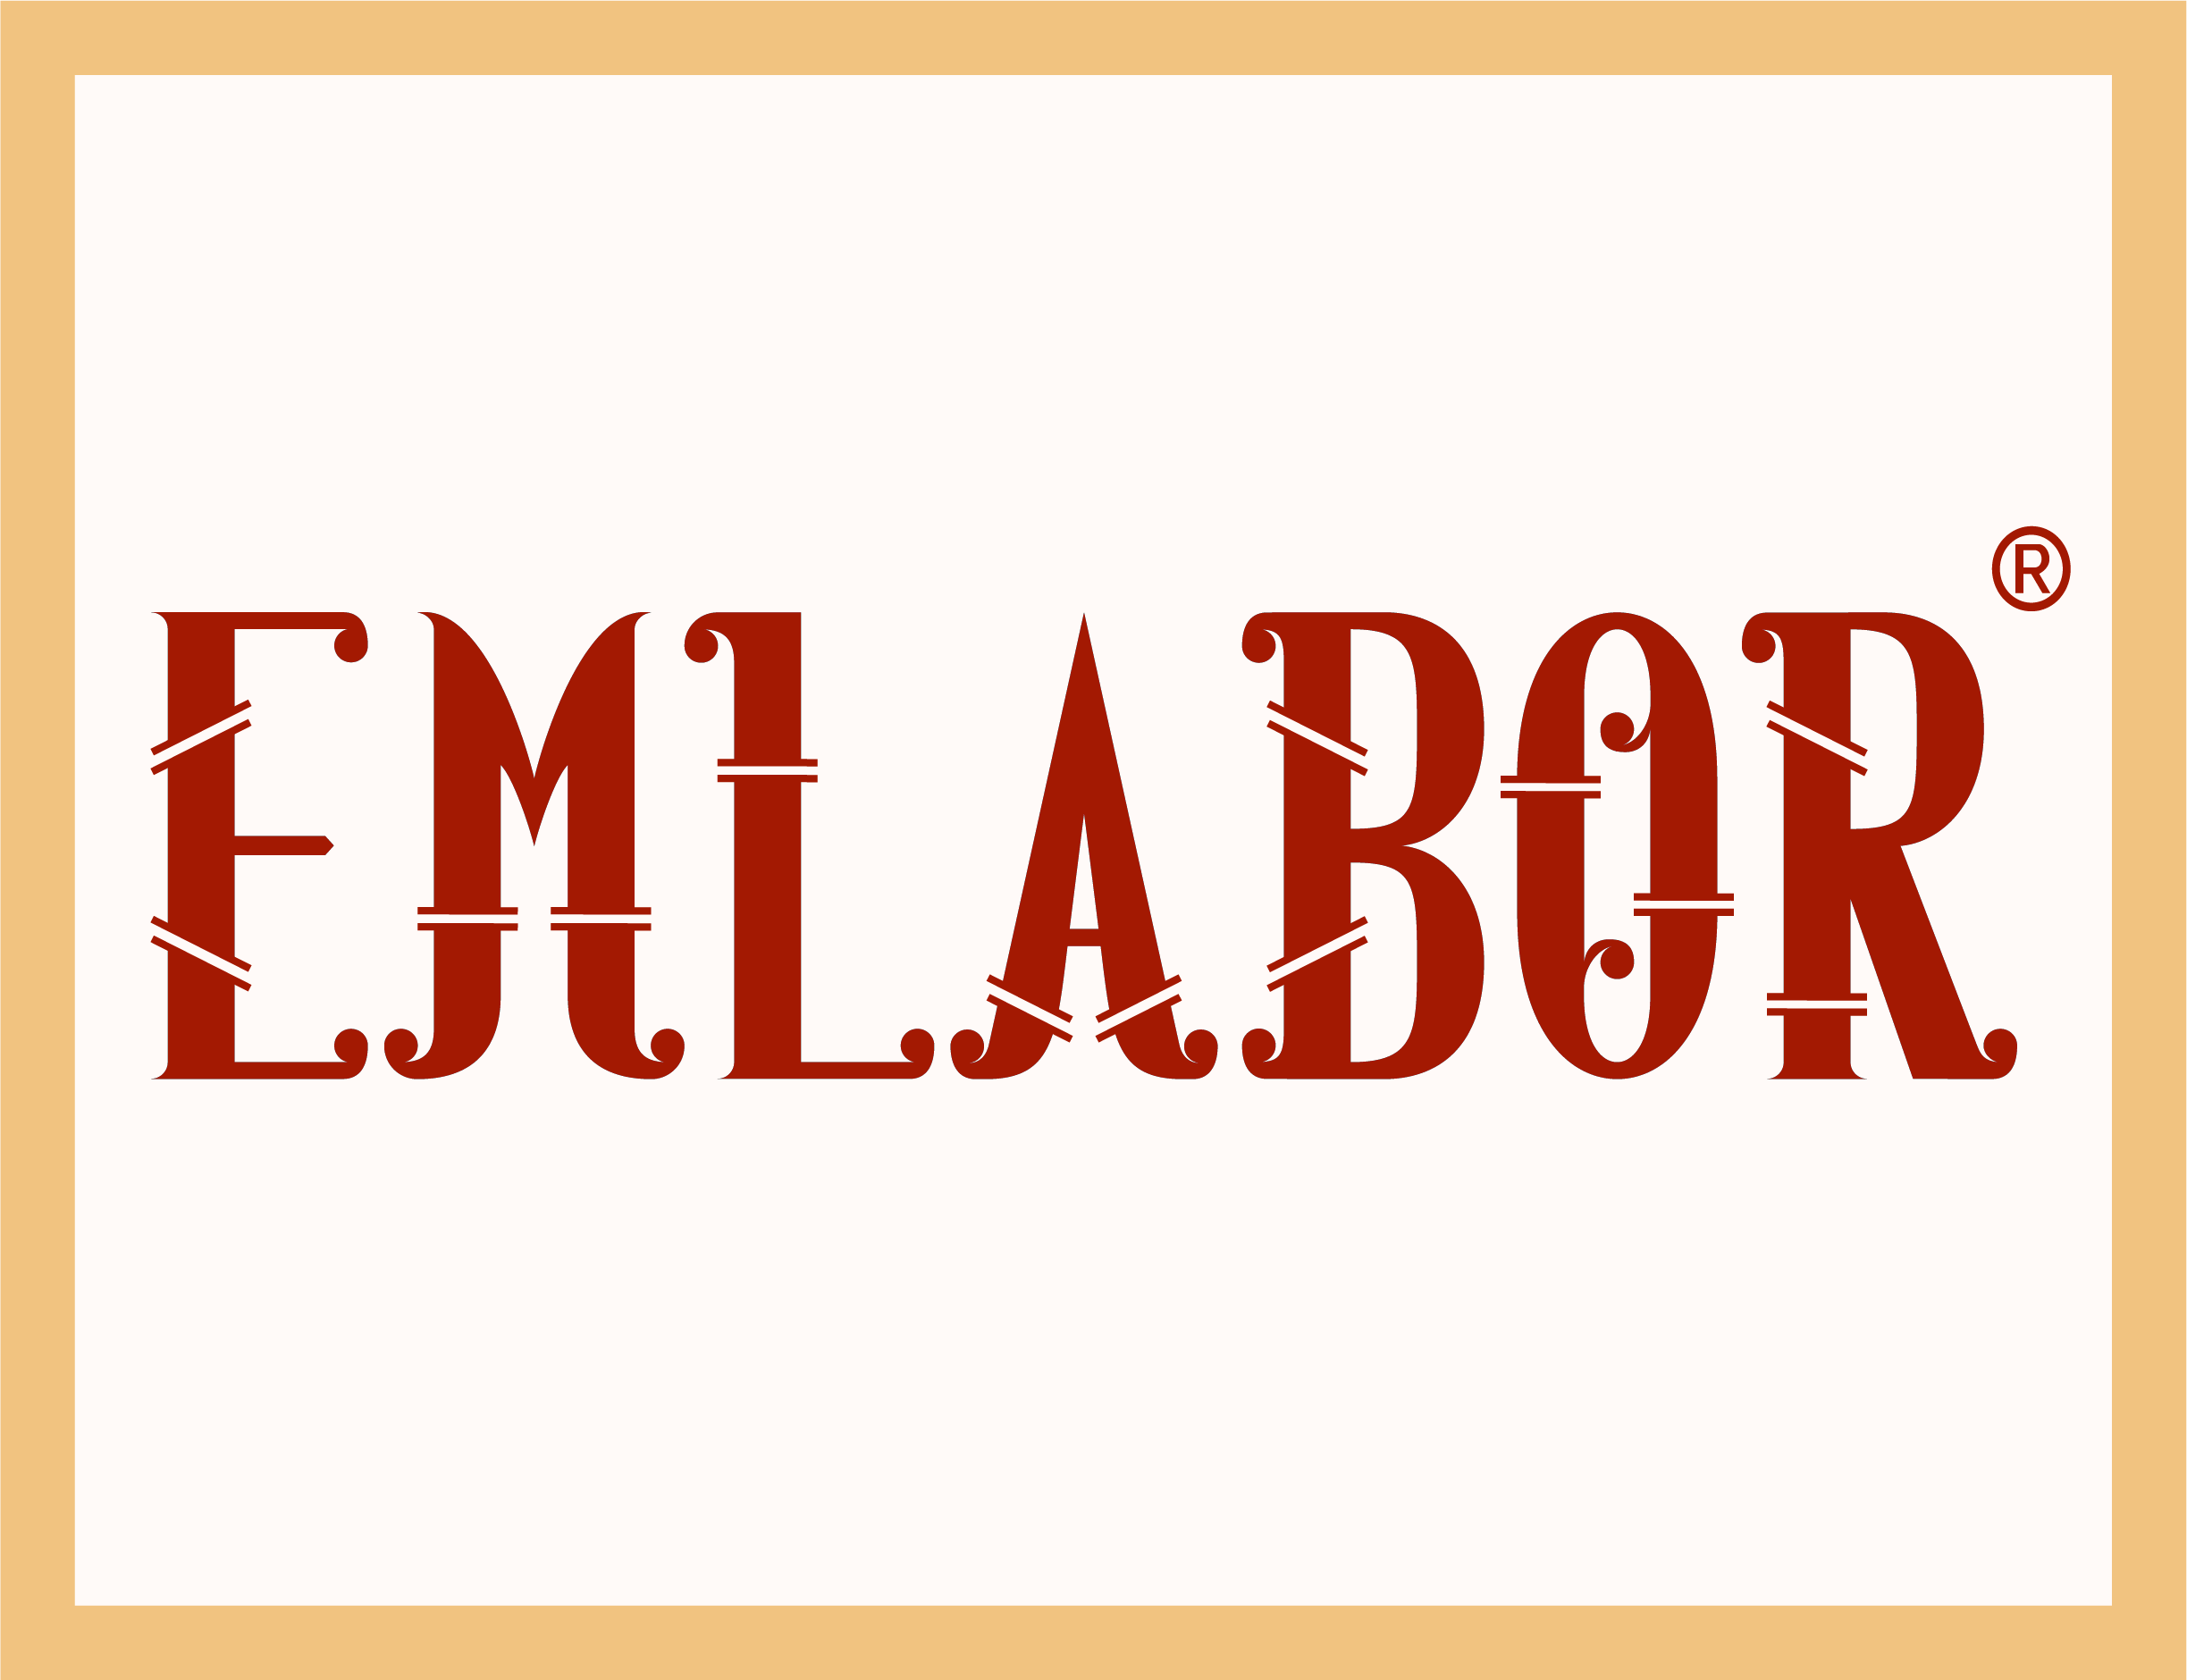 Logo of EMLABOR - the research product that is the 'emotional labour diagnoser'